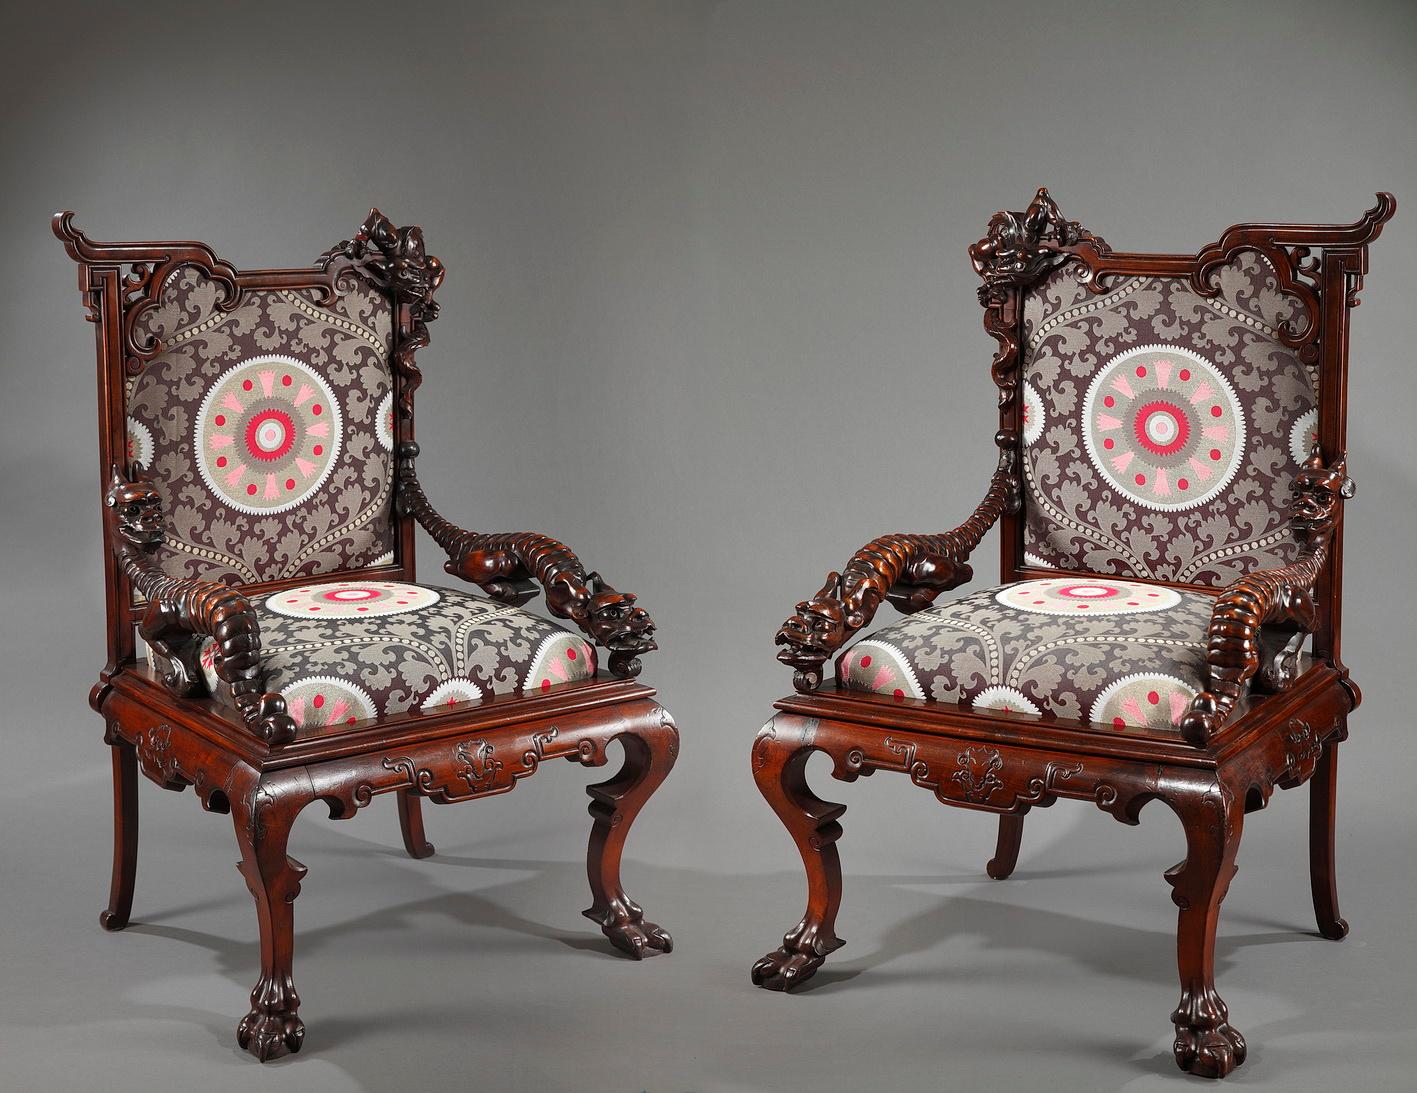 These armchairs made of tinted wood are to be linked to another pair of armchairs executed by Gabriel Viardot, and now exhibited at the Decorative Arts Museum in Paris (Inv. 2006.105.1.2). They present a similar asymmetric design and an equal